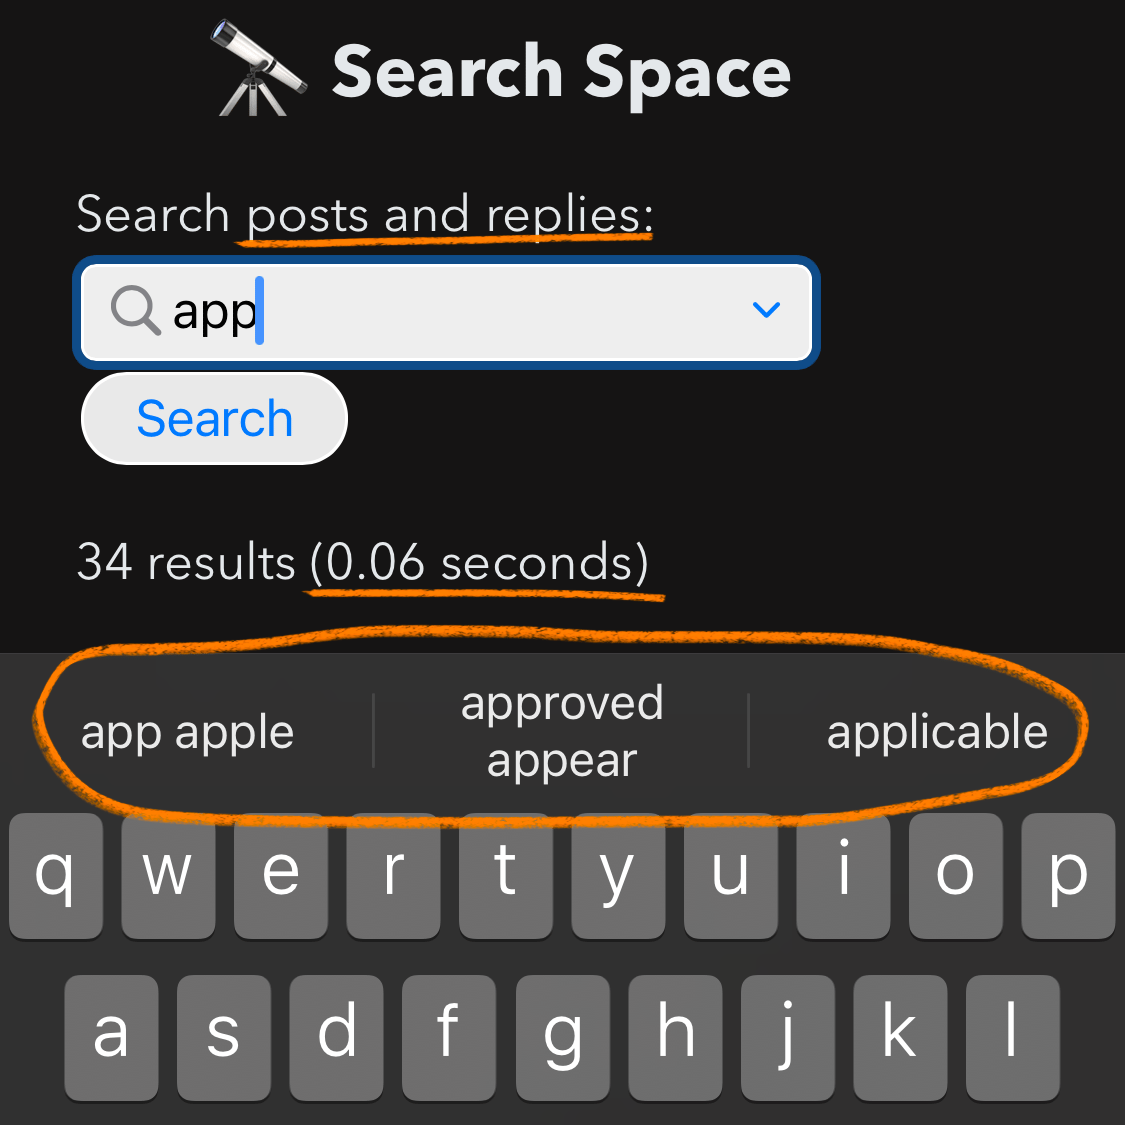 Screenshot of a search page. The word app is written in a text field labeled search posts and replies. Three suggestions are shown to the user: app apple, approved appear, and applicable. It’s fast! The results are fetched in 0.06 seconds.